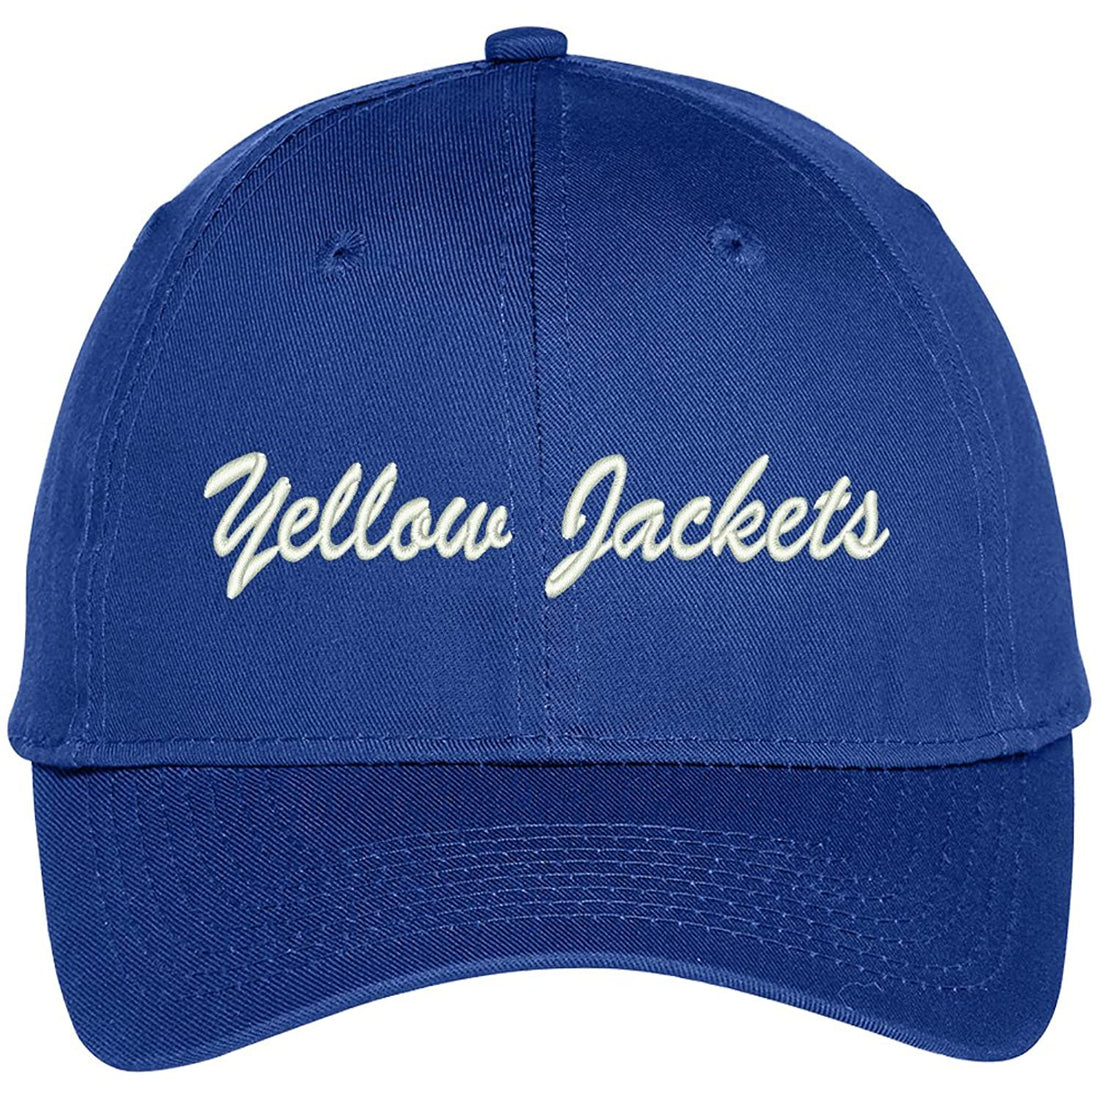 Trendy Apparel Shop Yellow Jackets Embroidered Team Nickname Mascot Cap